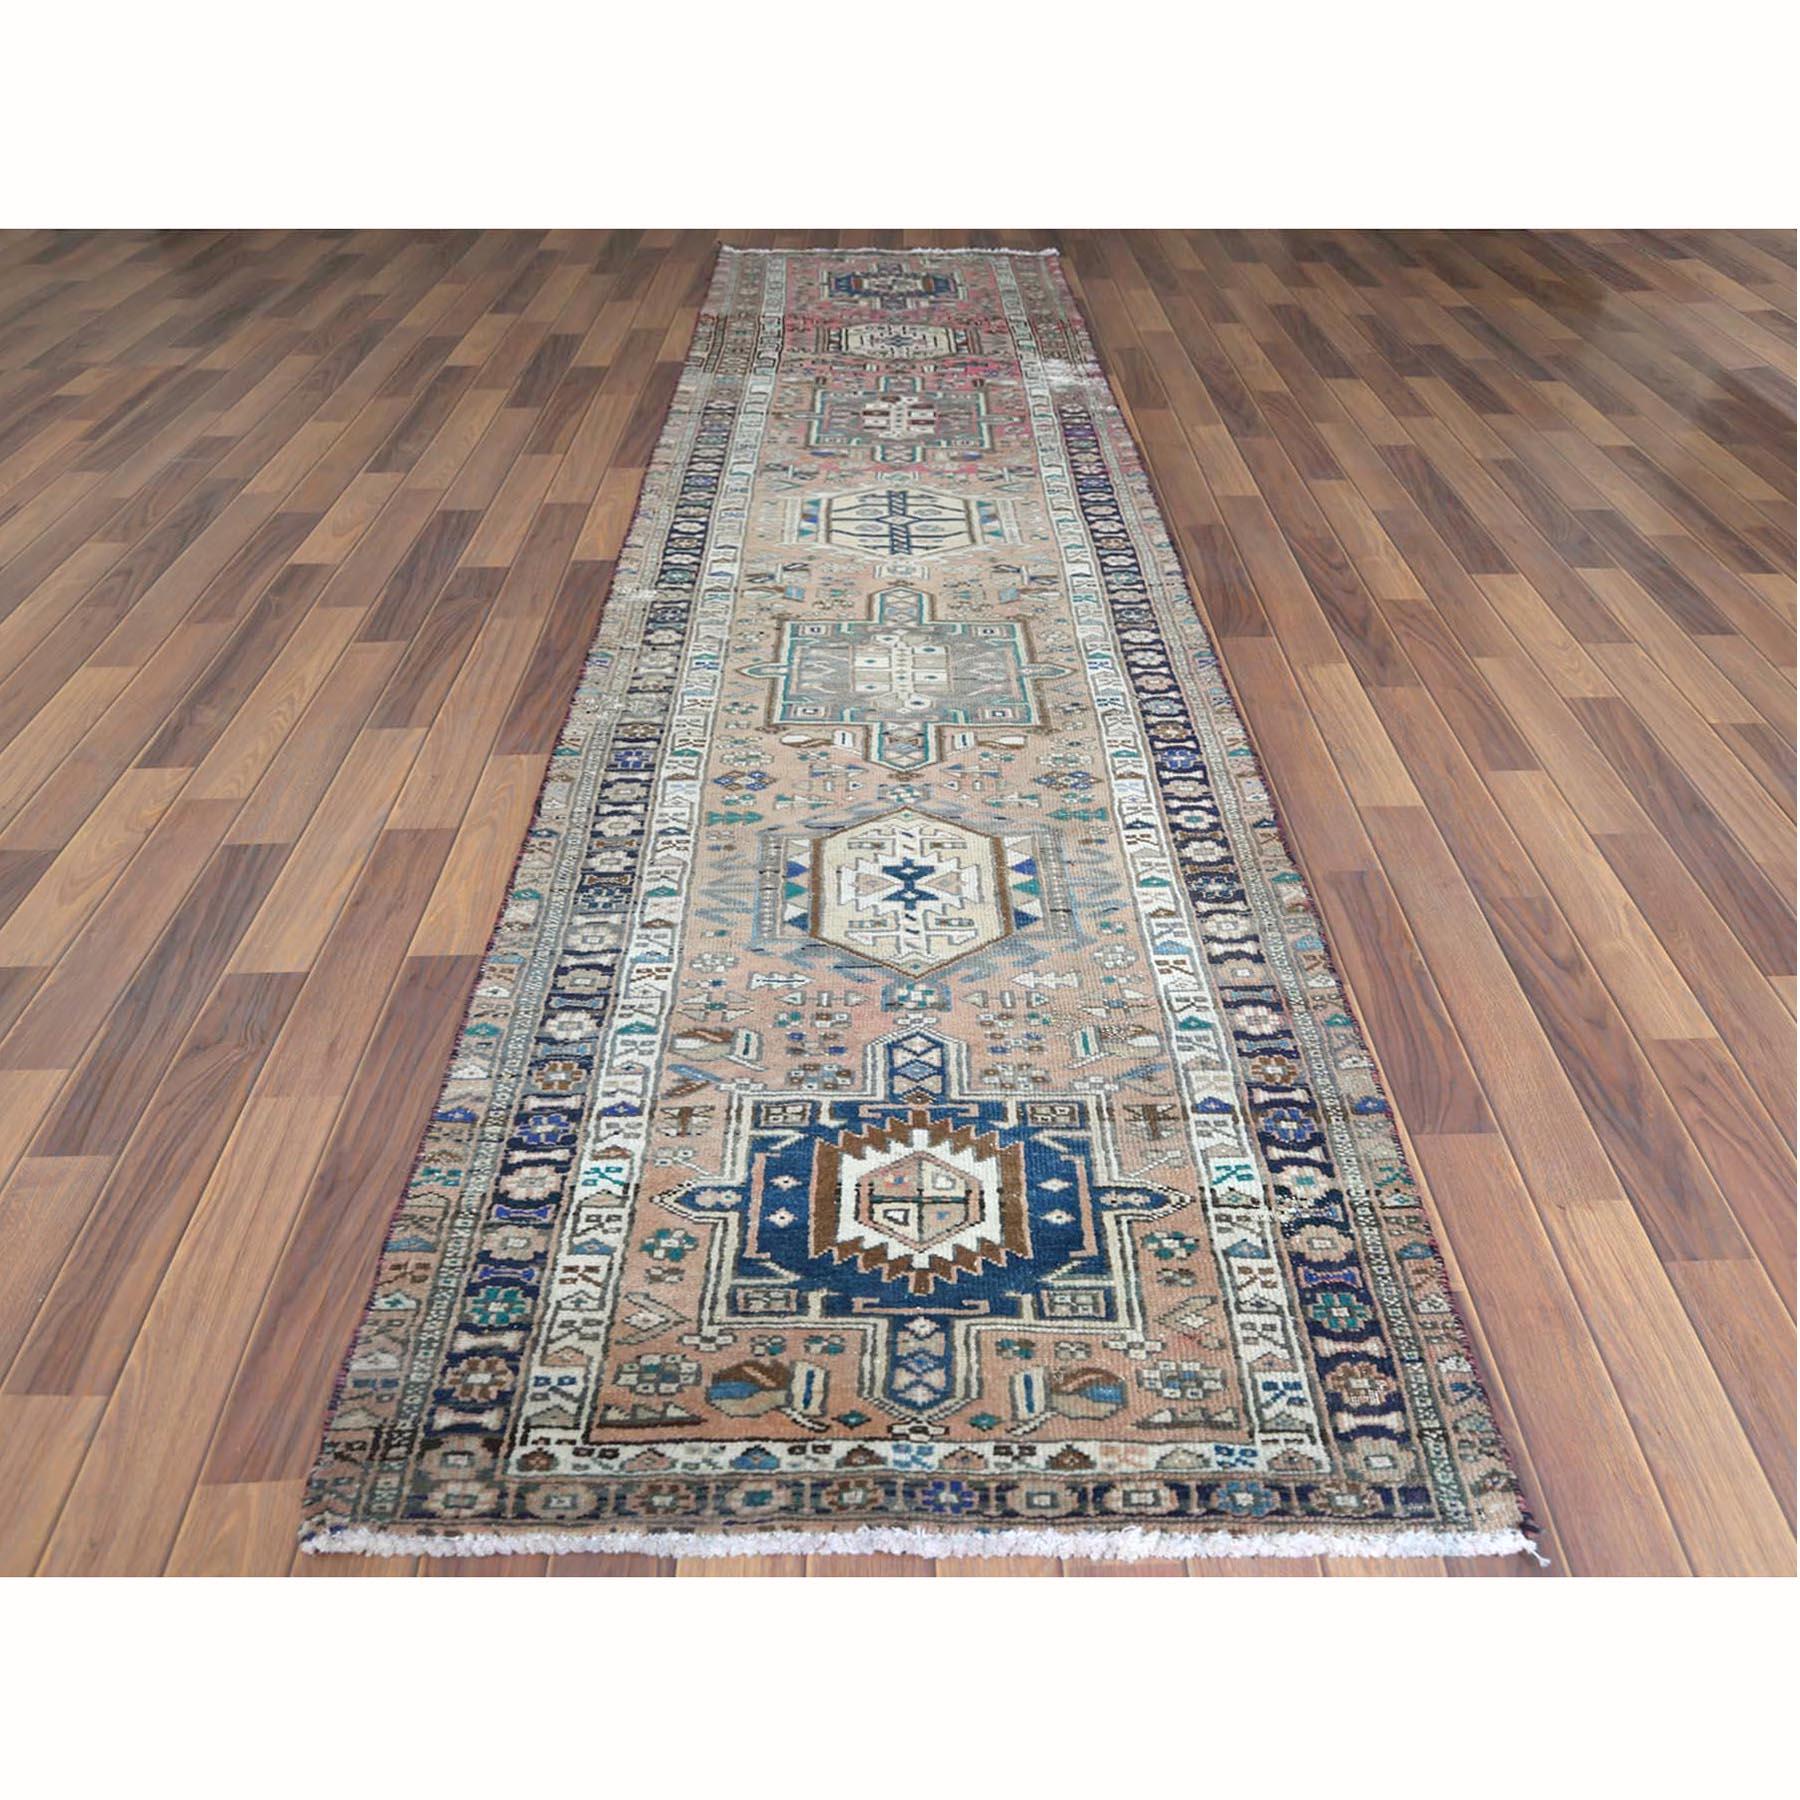 This fabulous hand-knotted carpet has been created and designed for extra strength and durability. This rug has been handcrafted for weeks in the traditional method that is used to make
Exact Rug Size in Feet and Inches : 3'1